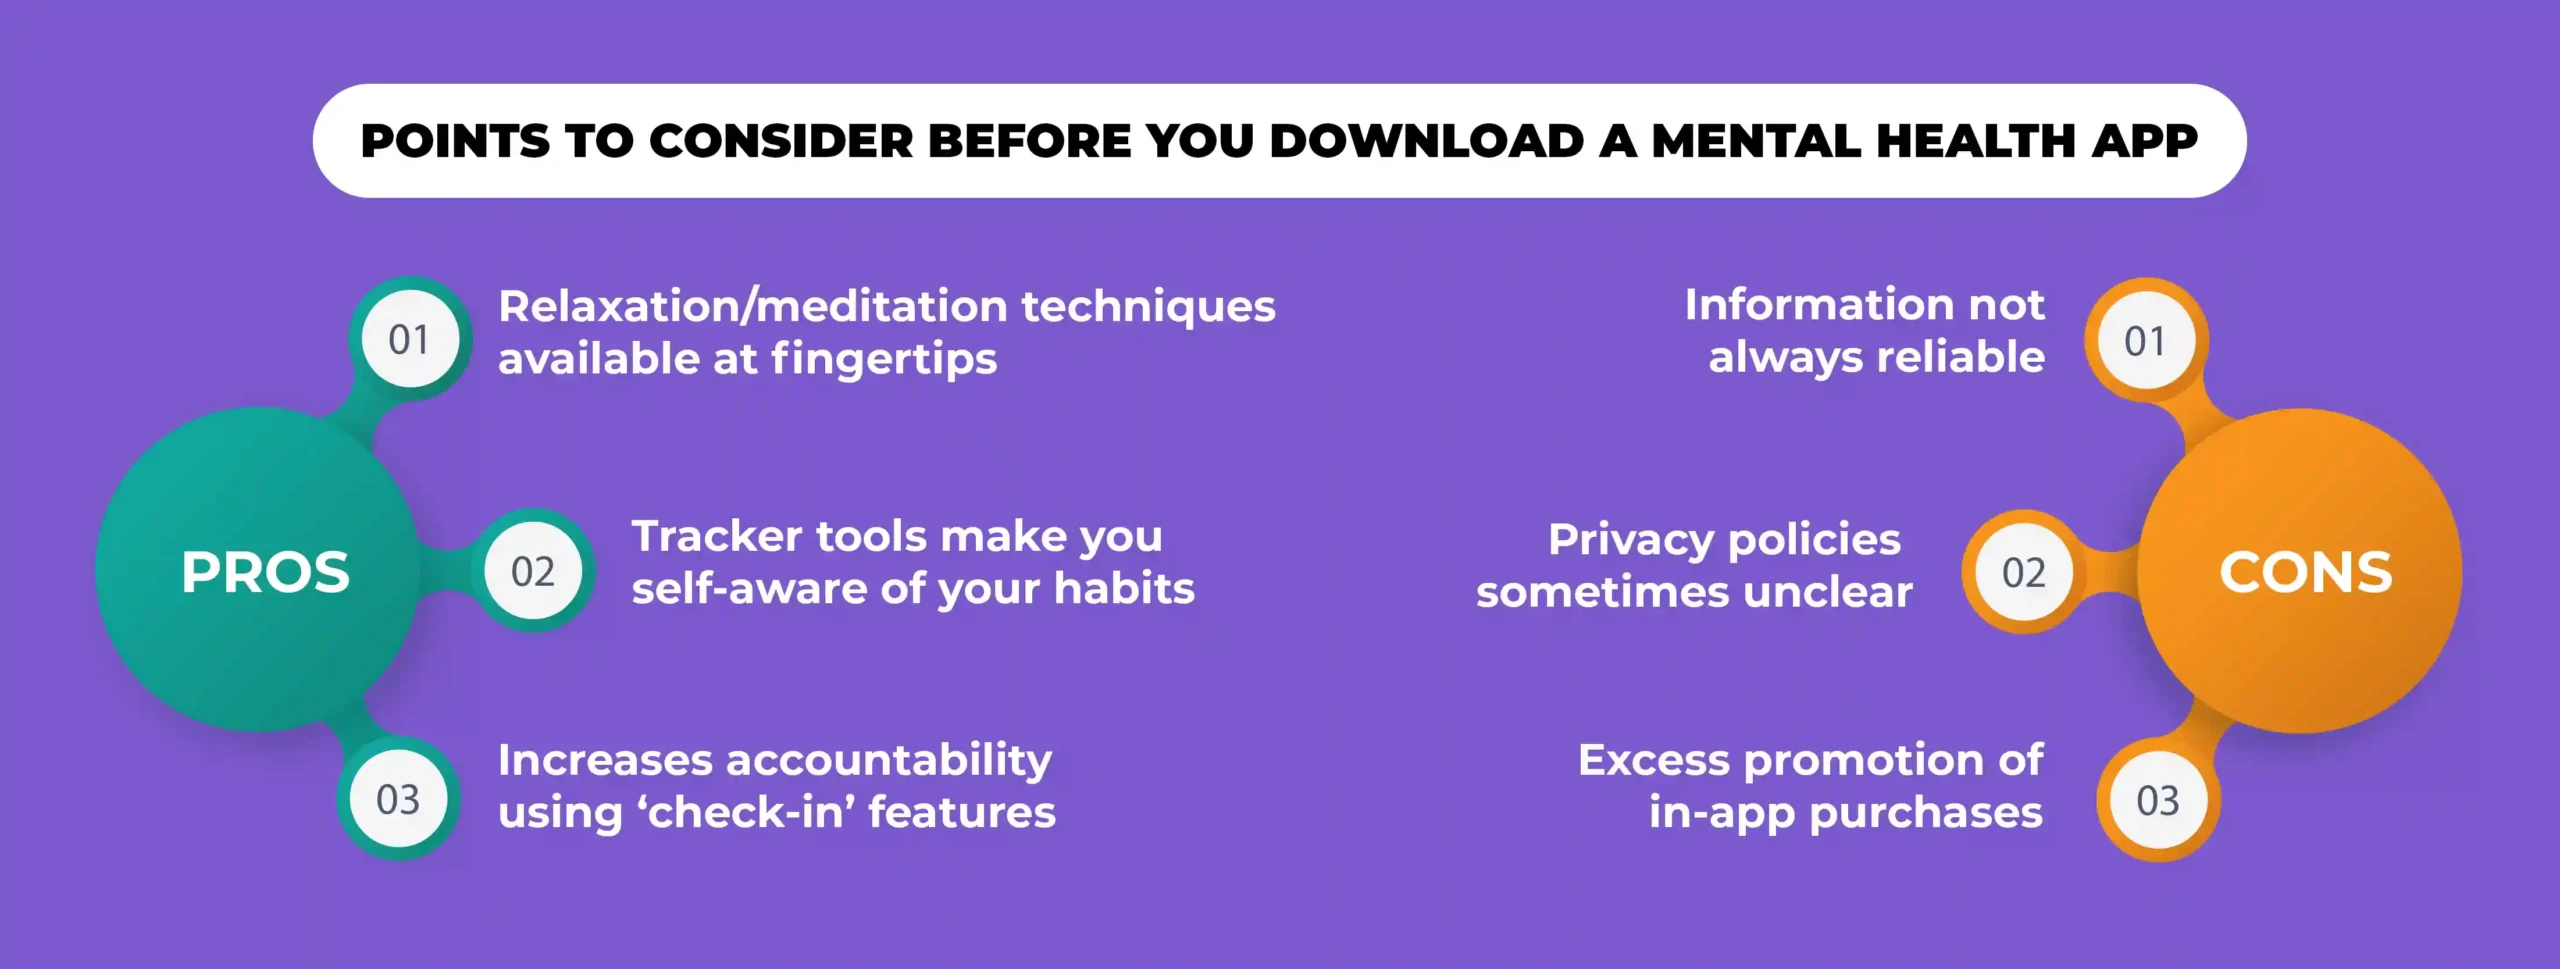 Points to consider before you download a mental health app